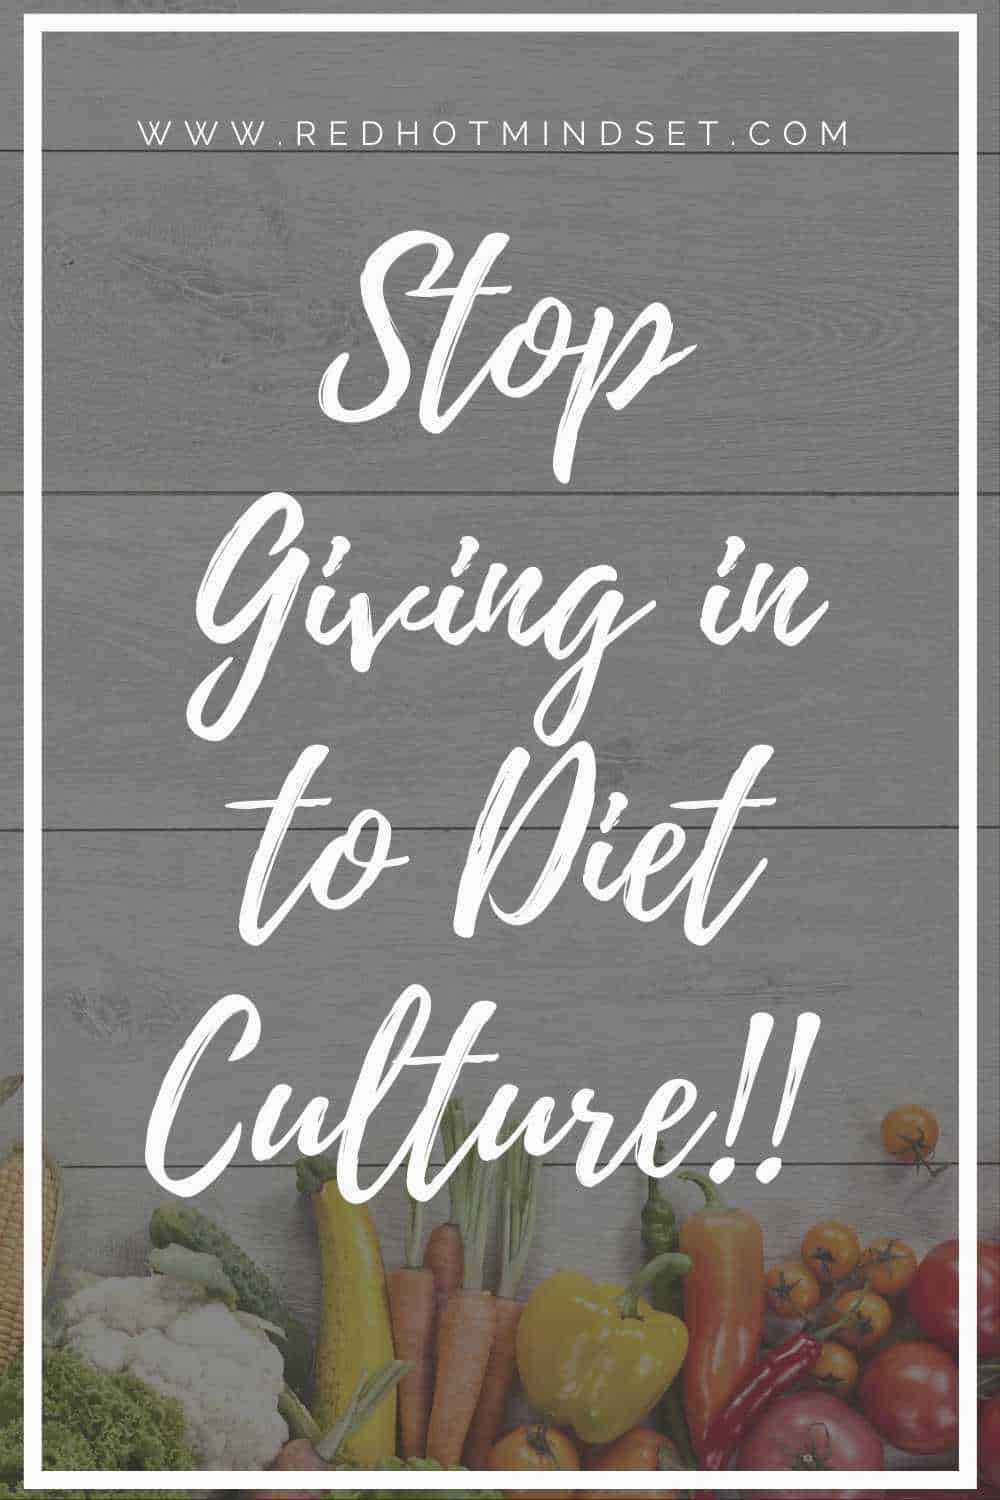 How I Stopped Giving in to Diet Culture and Overcame My Eating Disorder